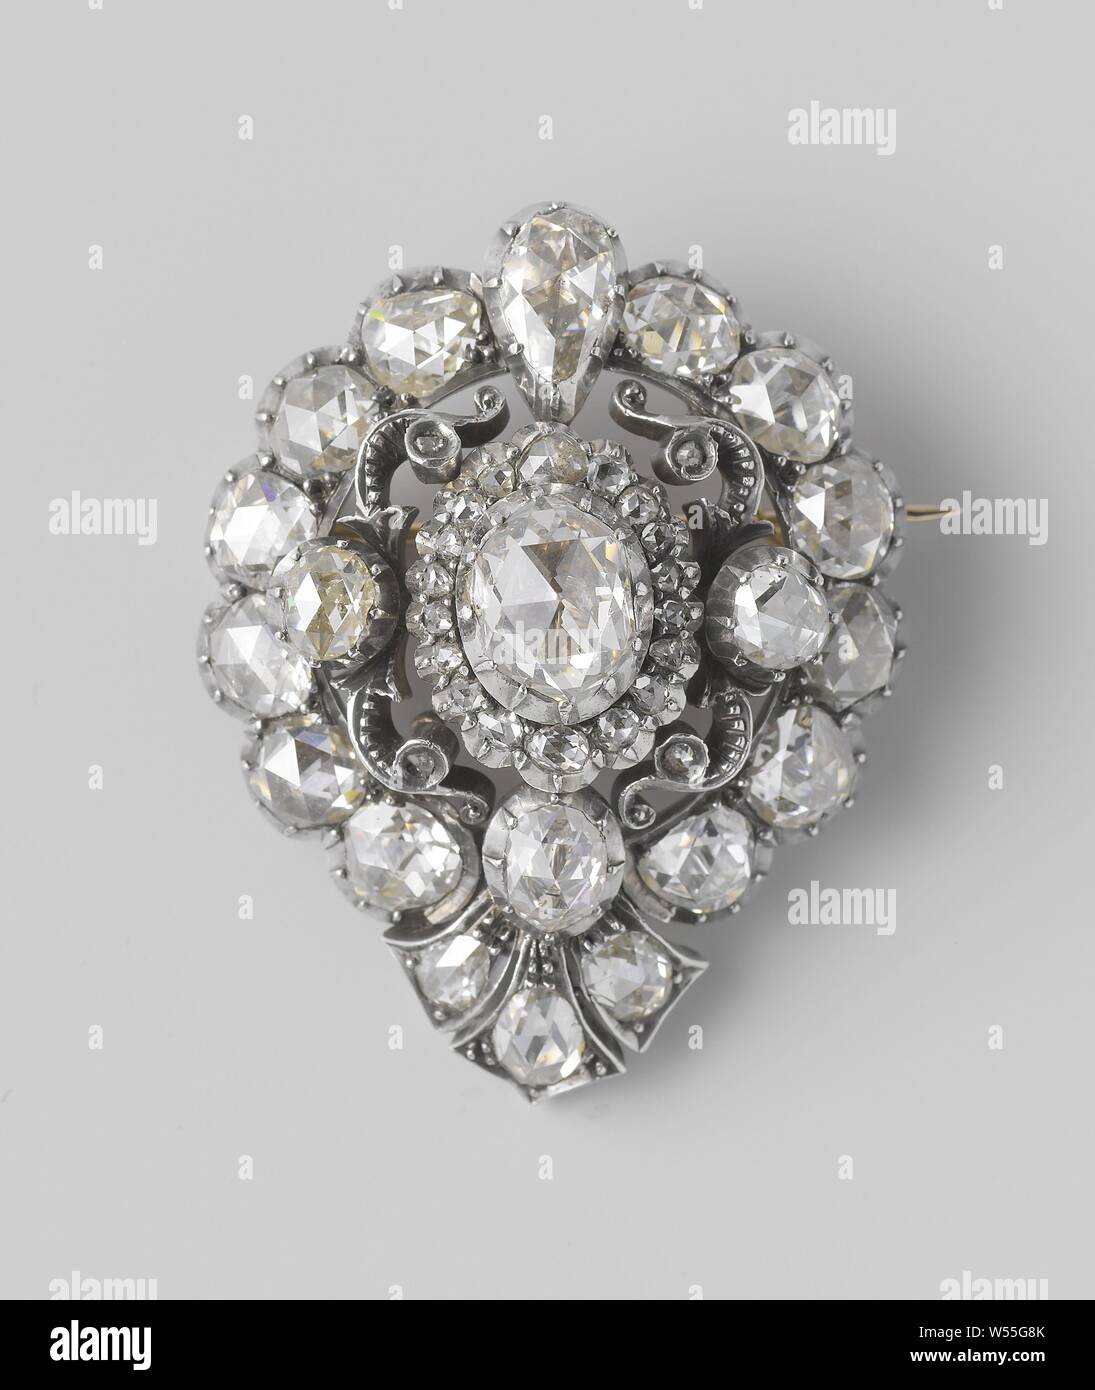 Brooch à double usage, Pear-shaped brooch of gold with 19 diamonds with a hook closure. The front is set with rose diamond, set and silver-plated. The central stone is an oval rose diamond placed in an entourage of 18 rose diamonds. From the center, tight tracks run to all sides. The ends are set with 18 different rose diamonds. The brooch includes a ring in which the central diamond can be set, and a screwdriver with a leg handle. the temple of Dagon. Pieces of a broken statue lie on the ground., William III (King of the Netherlands), anonymous, Netherlands, 1856 - 1862, gold (metal), diamond Stock Photo